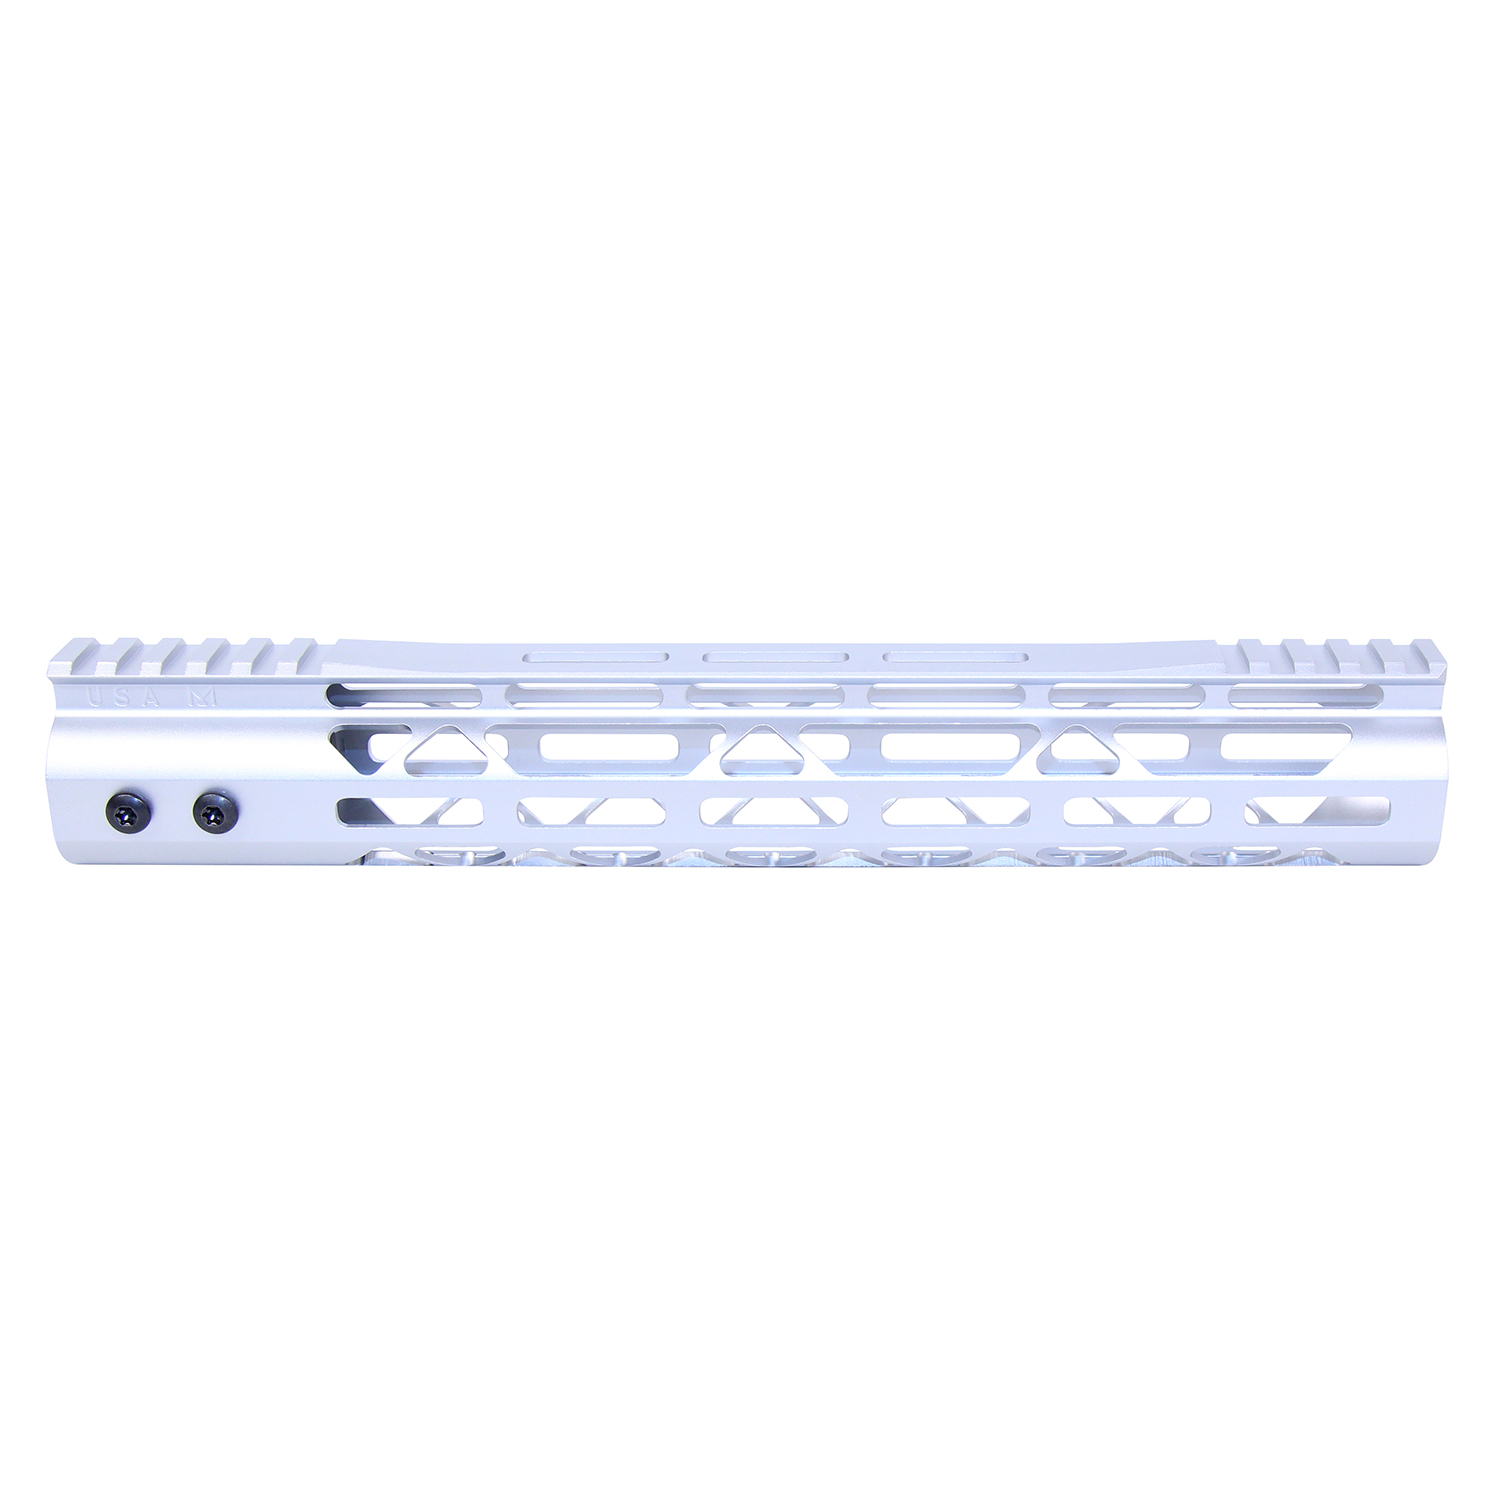 12" MOD LITE Skeletonized  Series M-LOK Free Floating Handguard With Monolithic Top Rail (Anodized Clear)